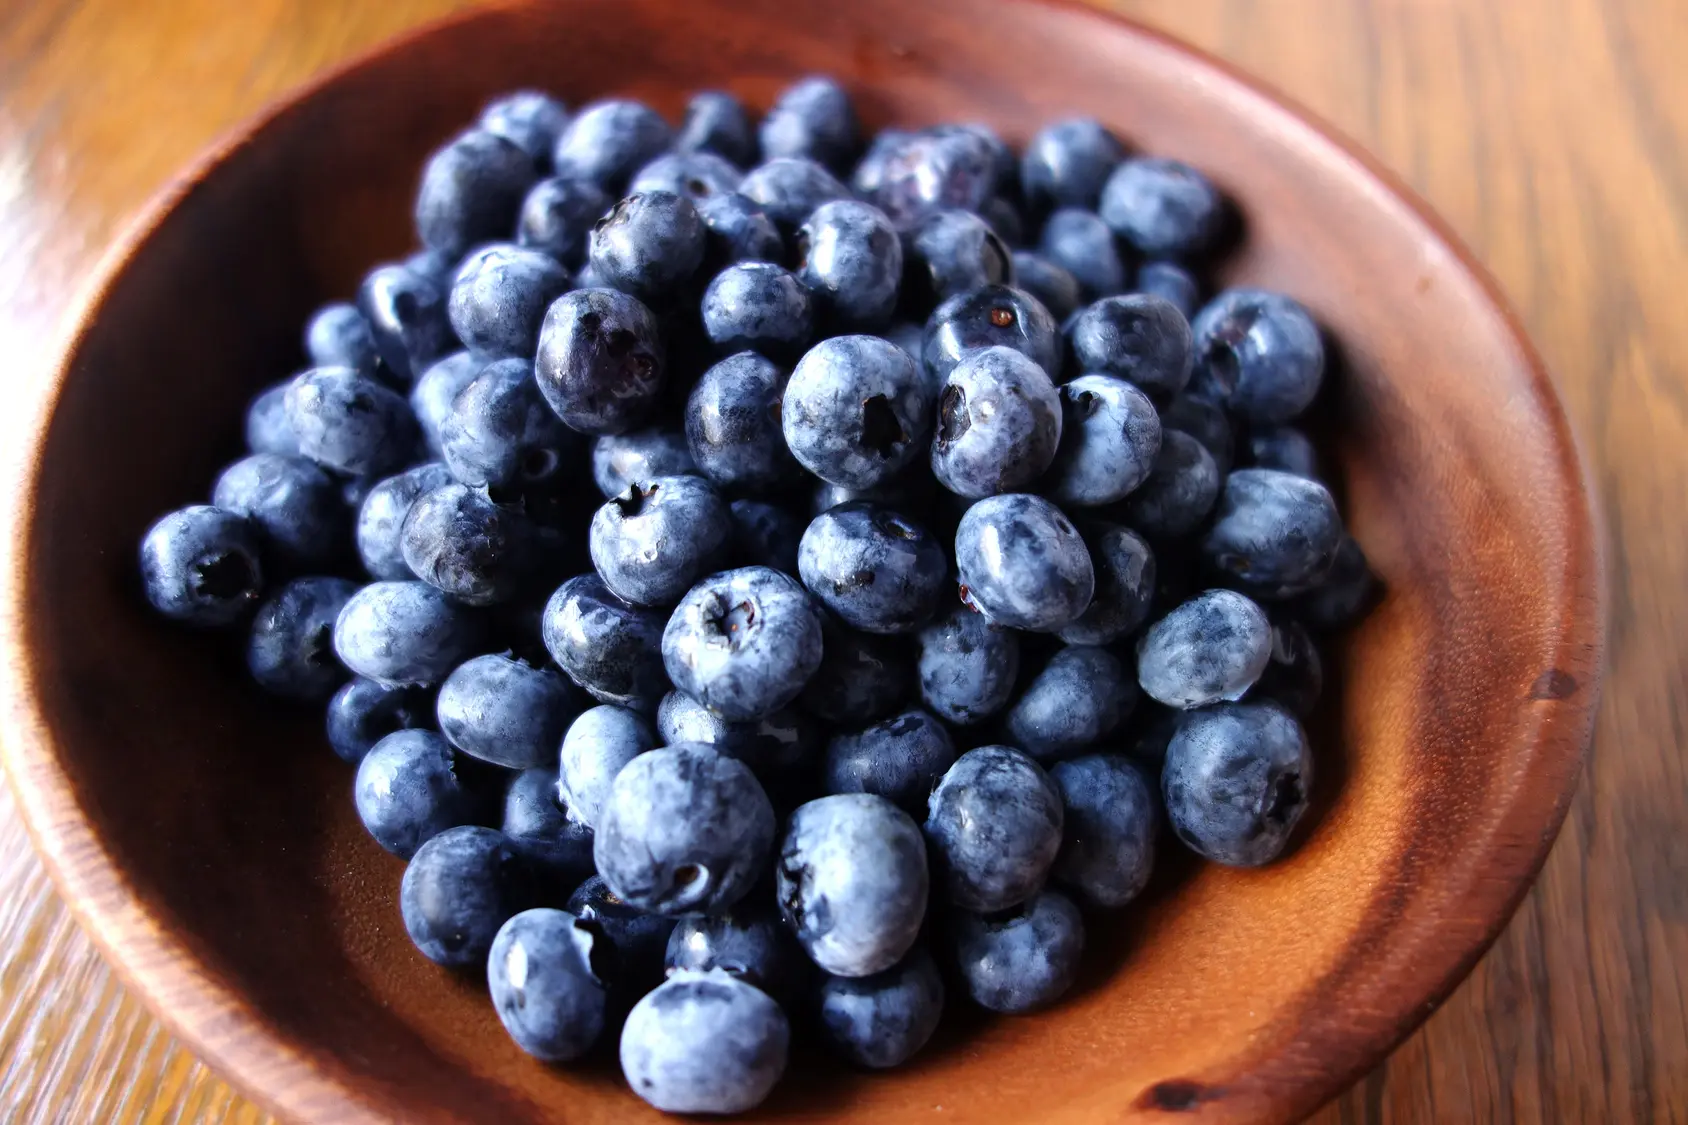 Why freeze blueberries?